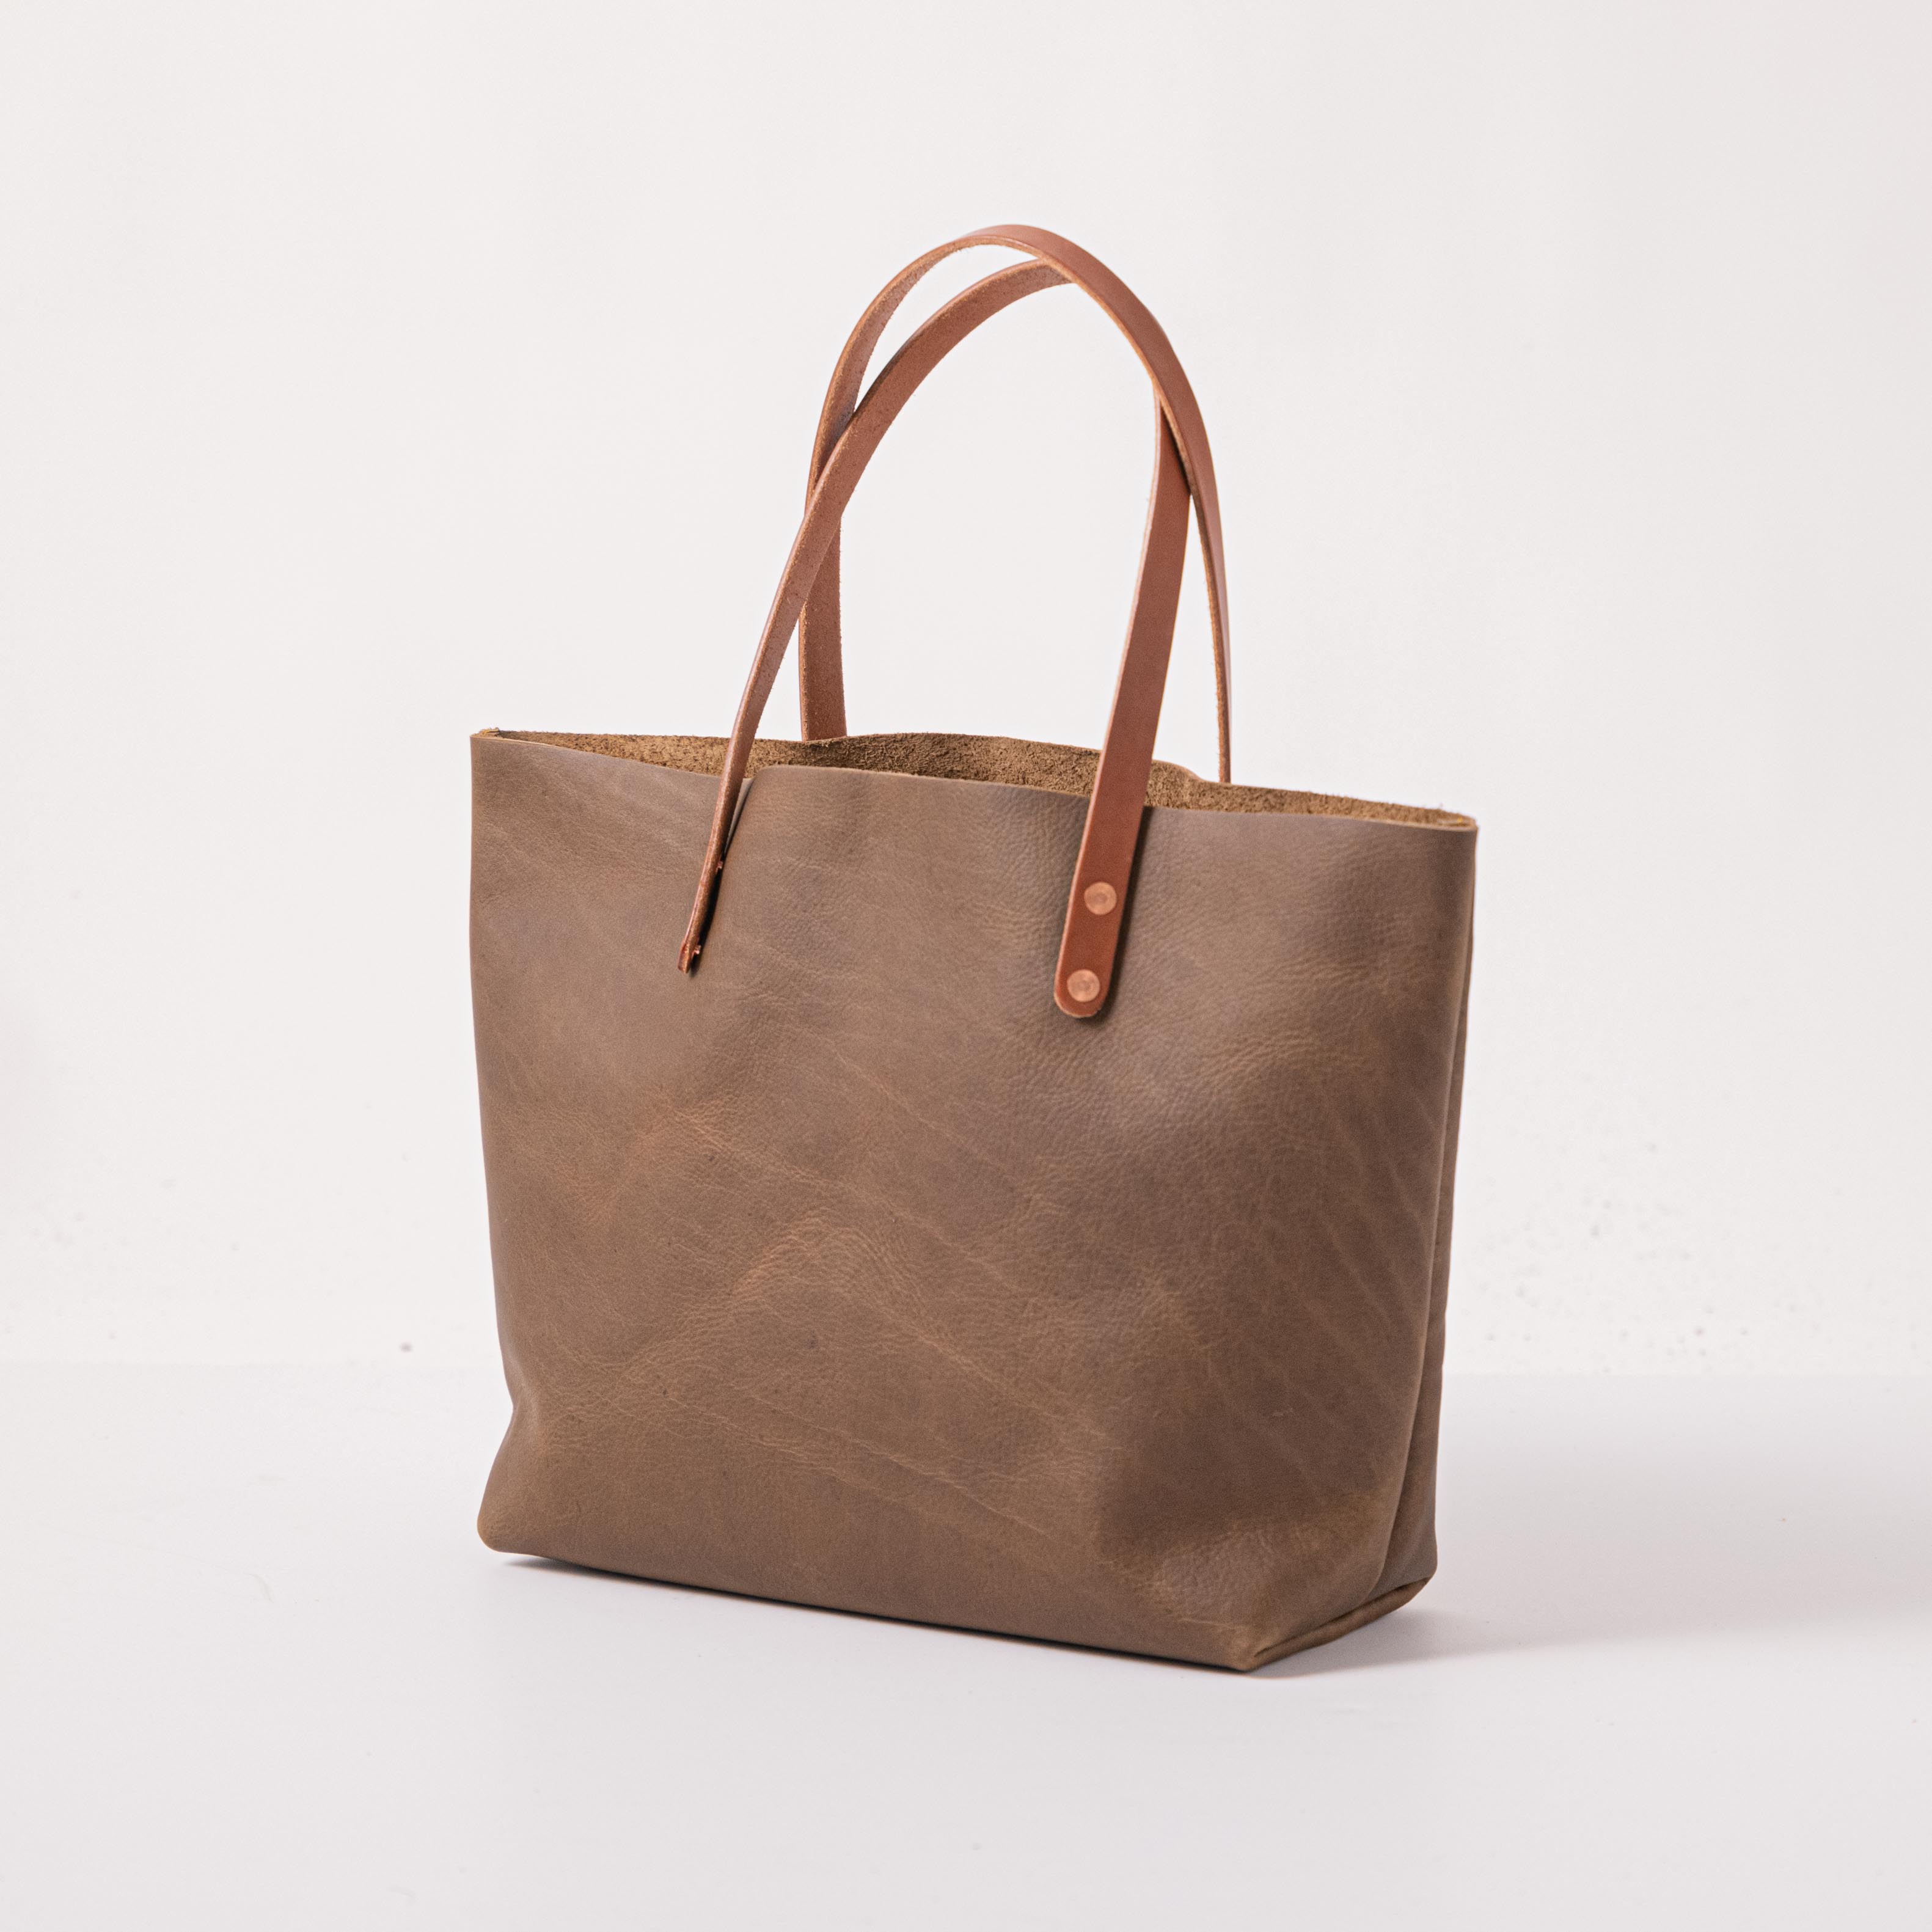 Darcy Bag | Green – M.I.L.A. made in Los Angeles